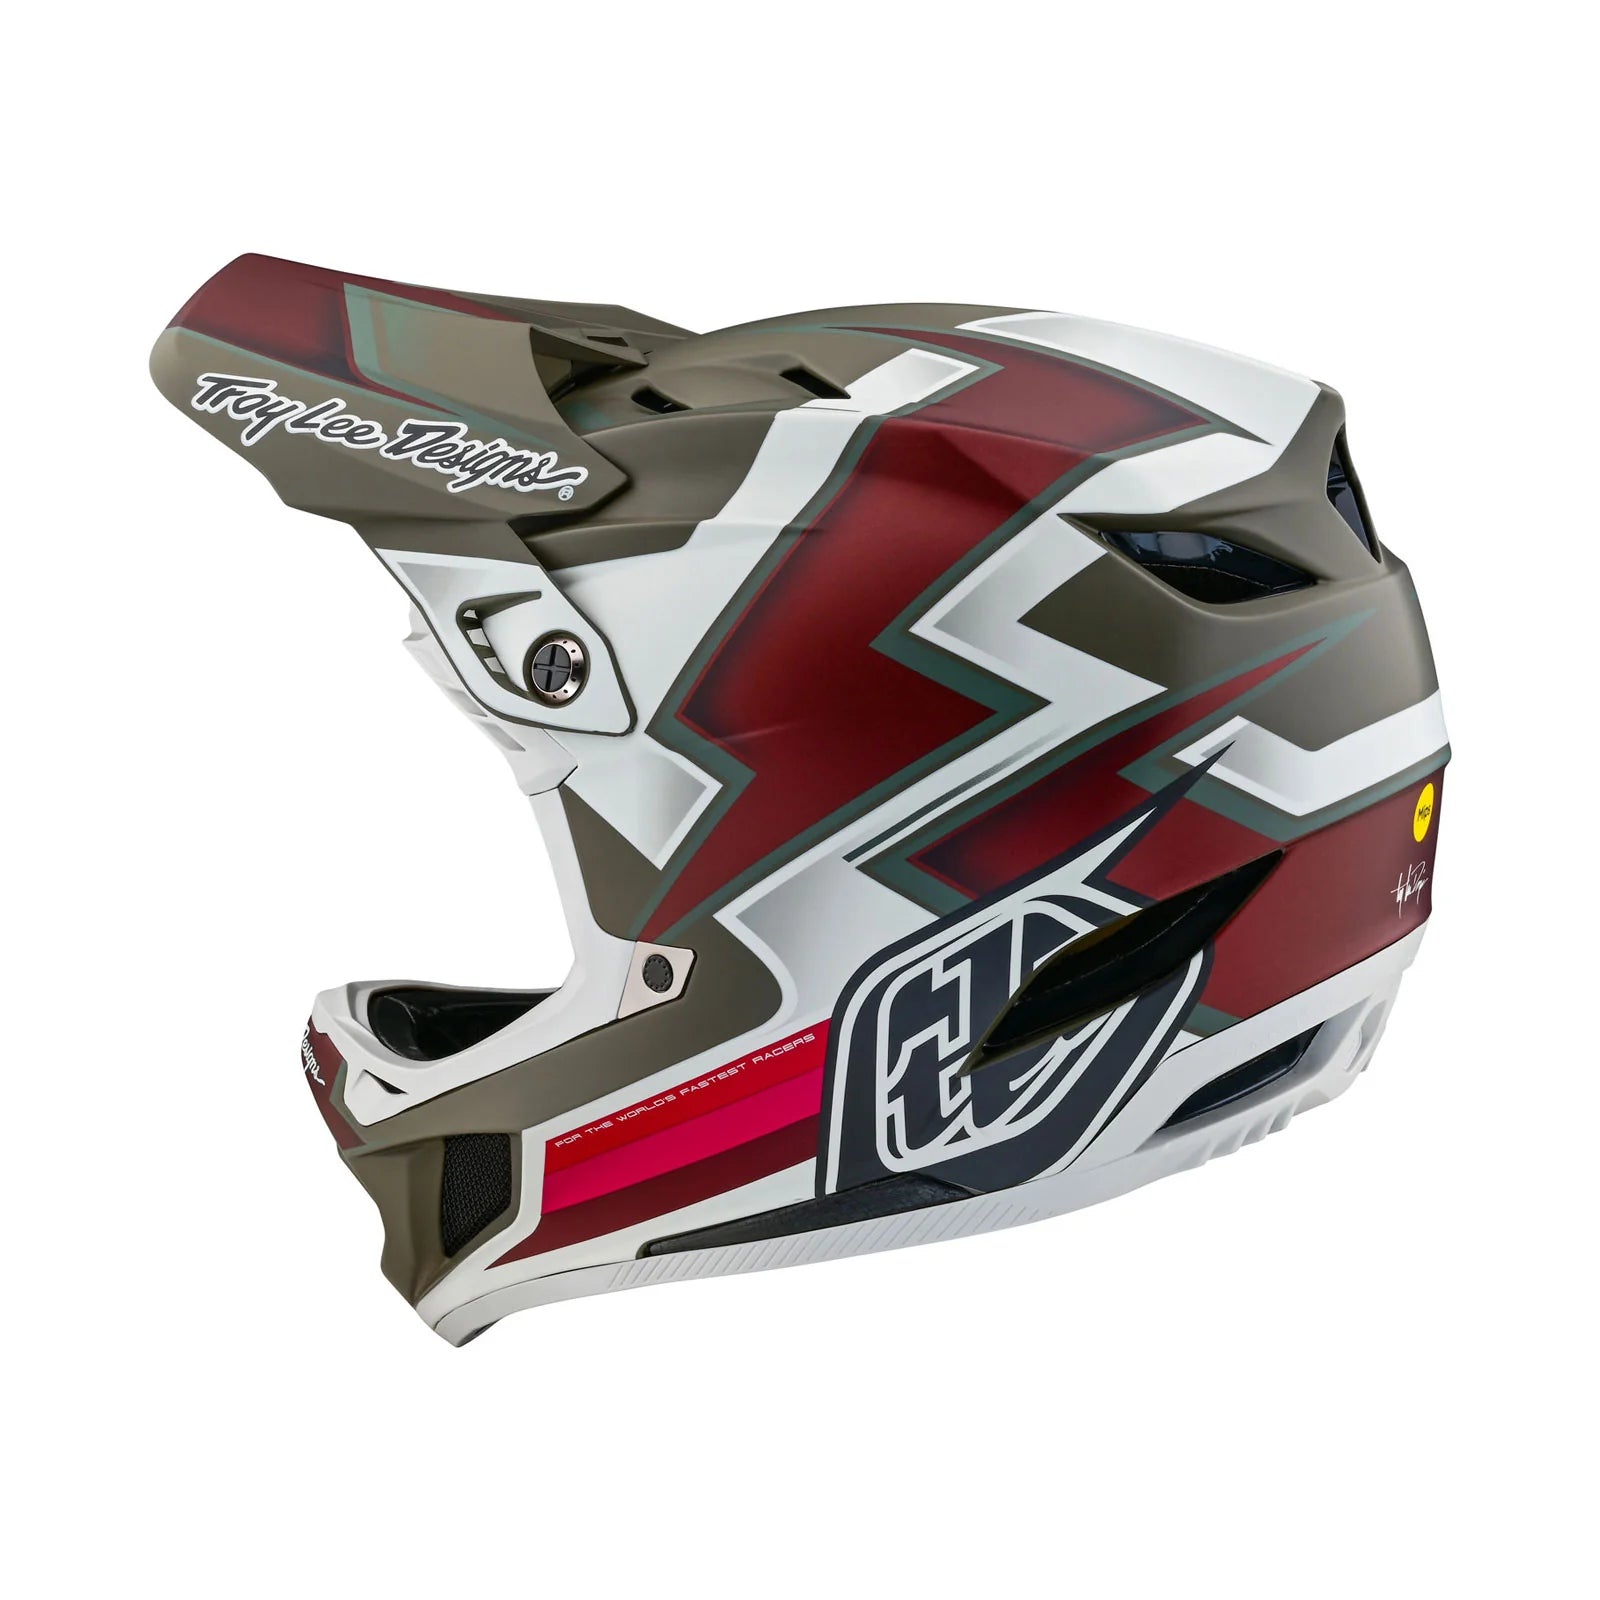 A TLD D4 AS Composite Helmet W/MIPS Ever Tarmac with a red and white design and a Mips C2 protection system.